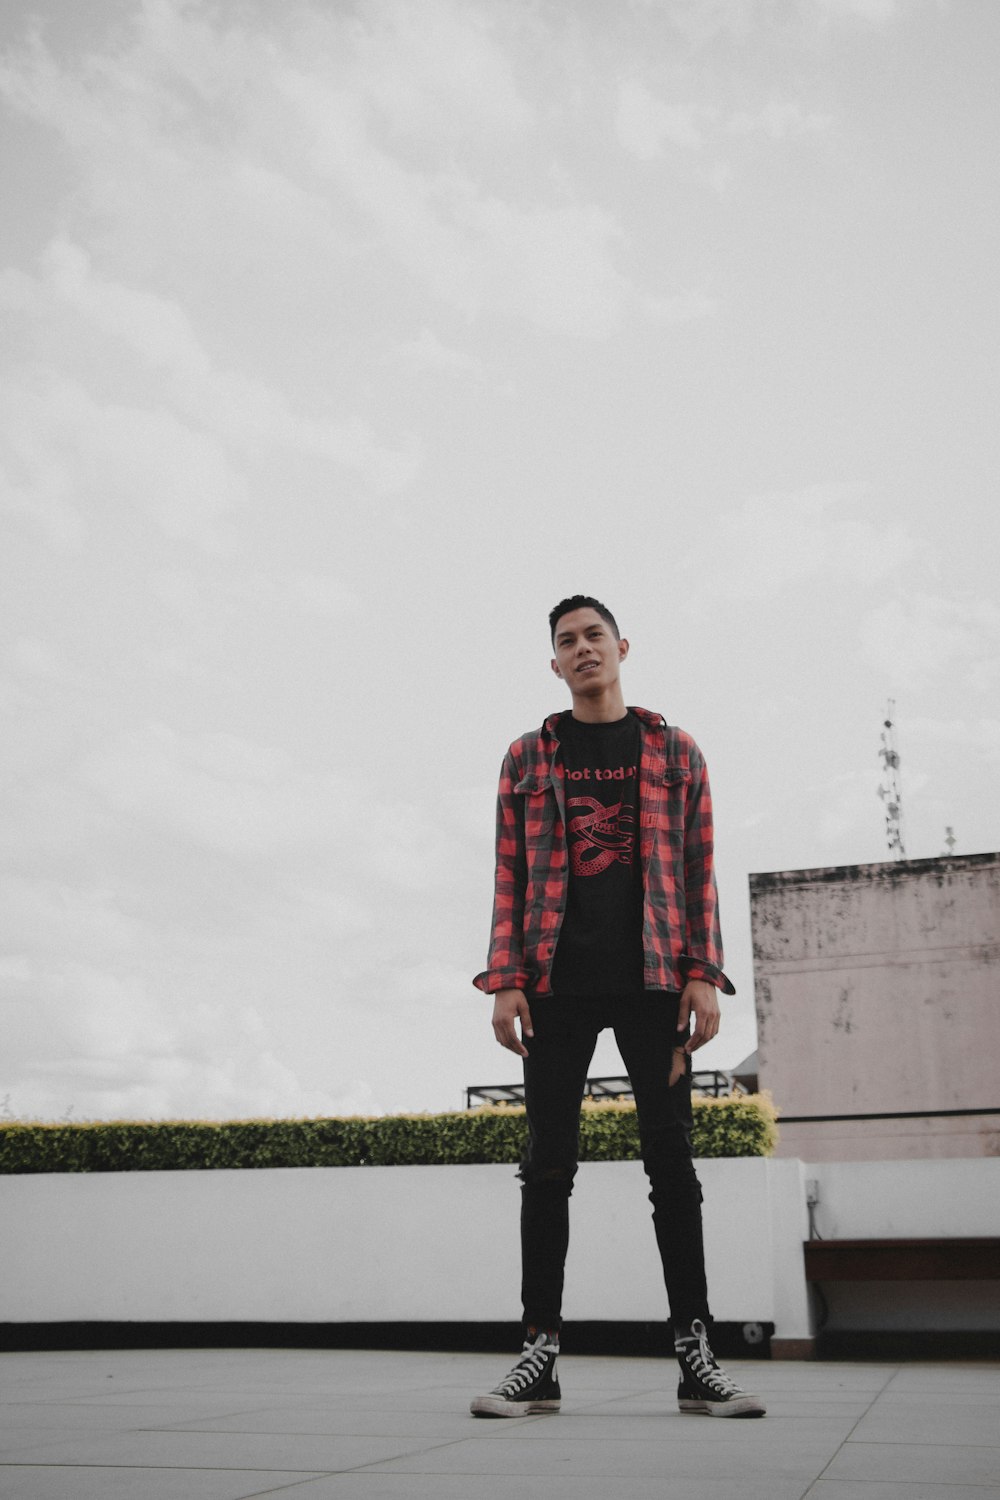 man wearing red and black plaid sports shirt